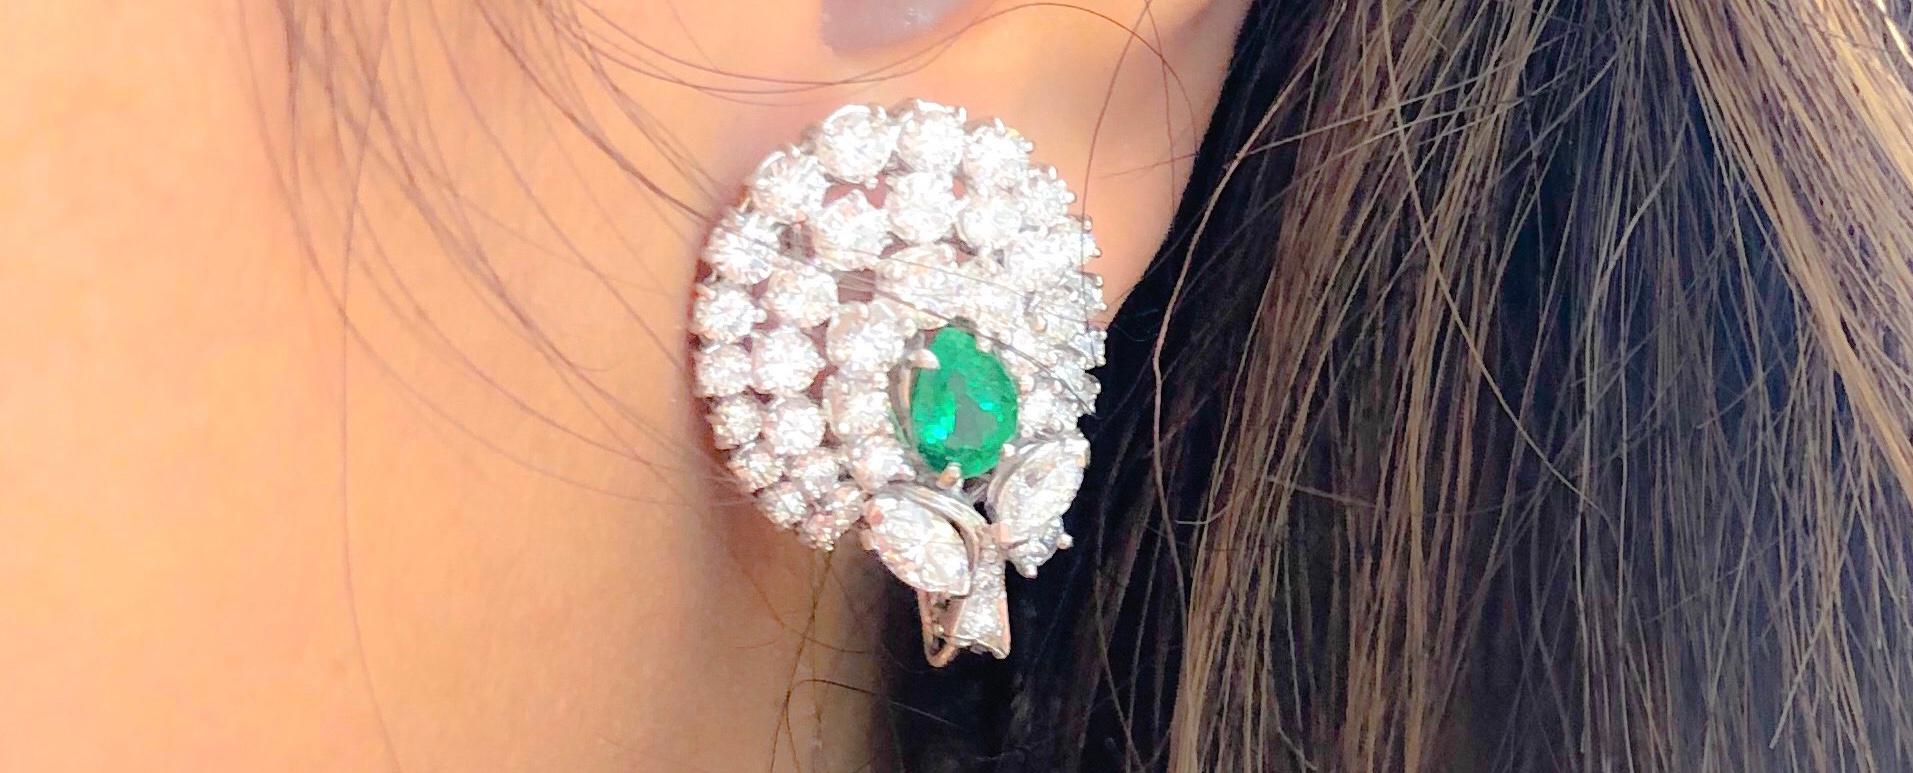 18 Karat White Gold Emerald and Diamond Earrings In Excellent Condition For Sale In La Jolla, CA